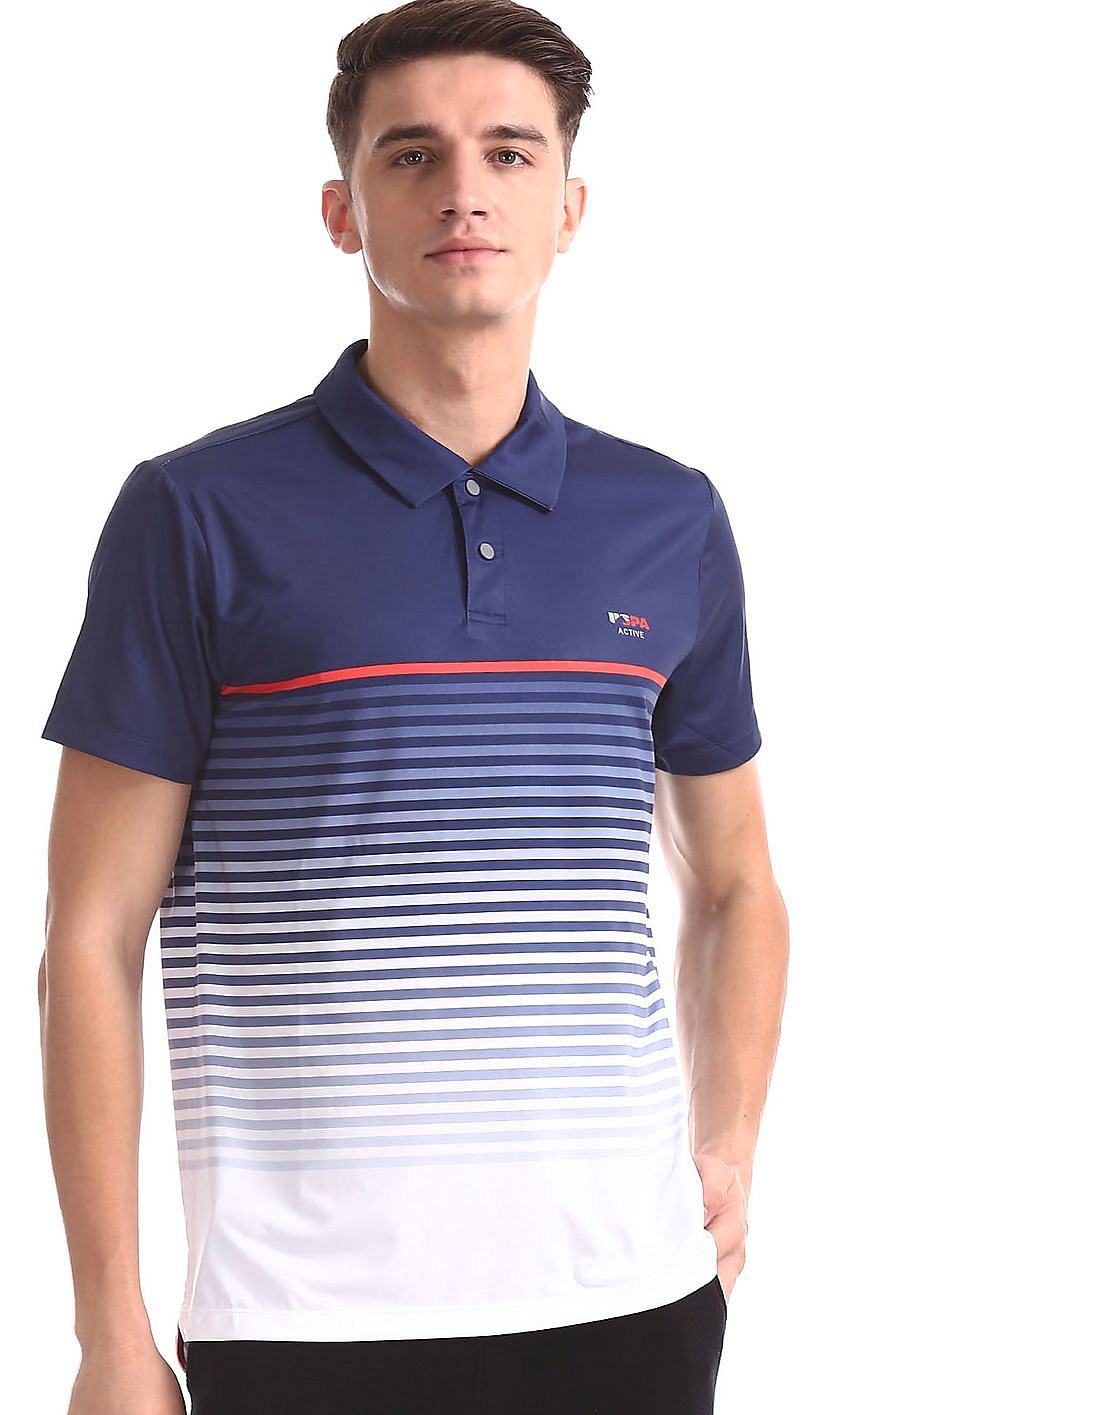 Buy Men Blue Striped Active Polo Shirt online at NNNOW.com